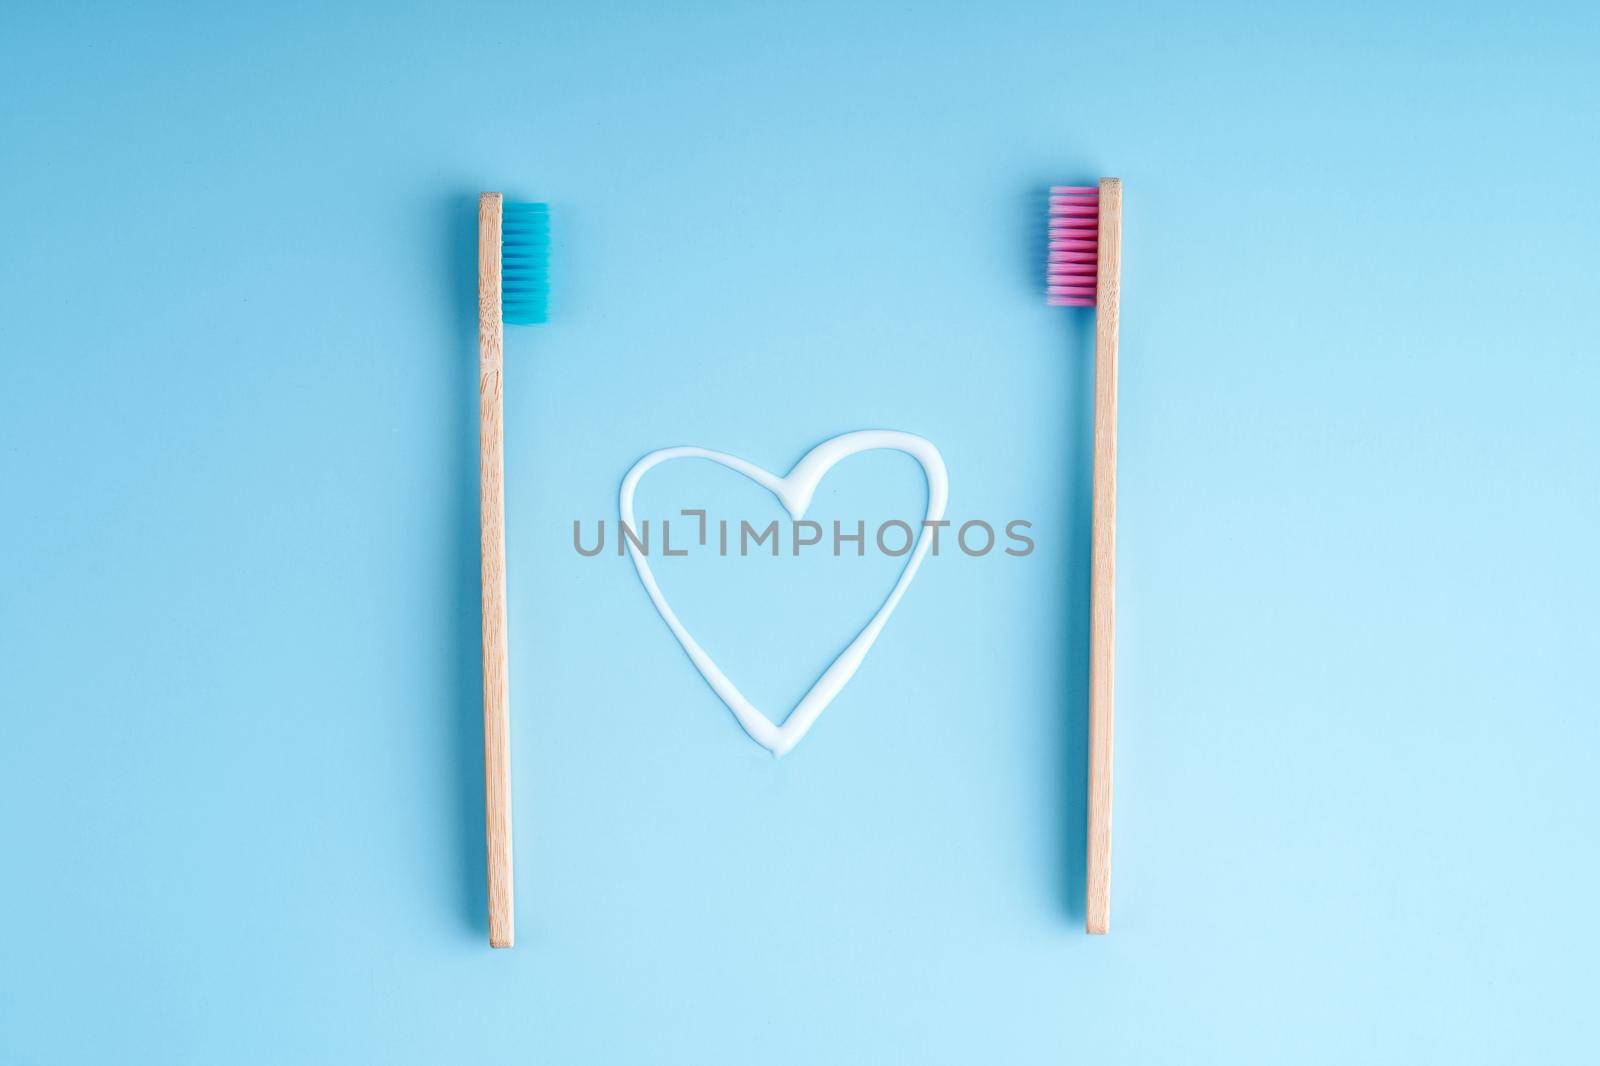 A pair of eco-friendly bamboo toothbrushes. Global environmental trends. Toothbrushes of different genders by Try_my_best